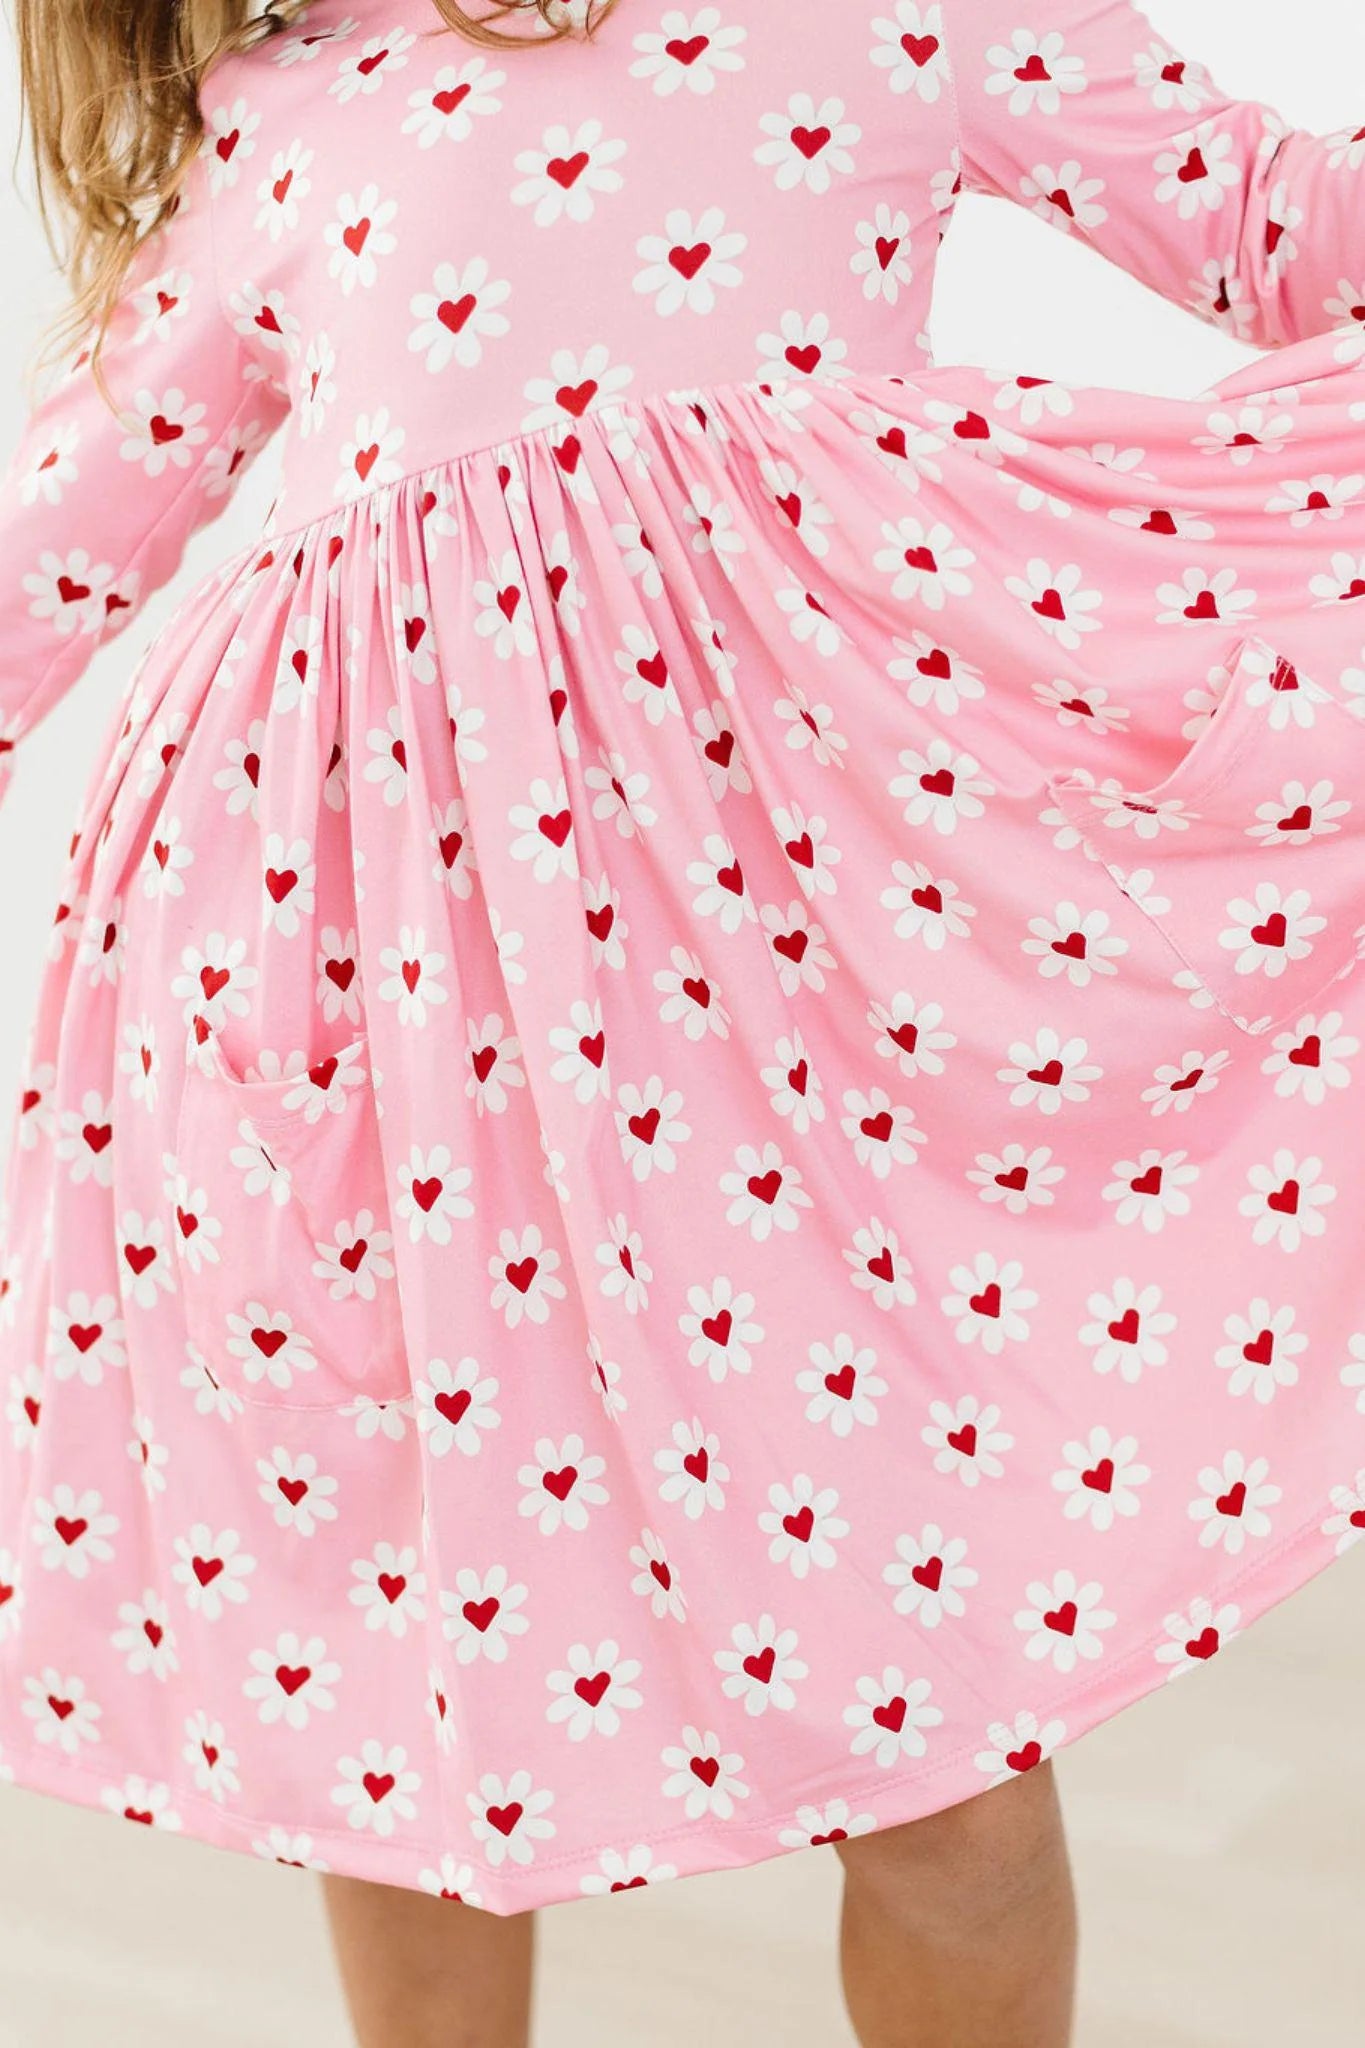 Three quarter sleeve pink twirl dress with daisy print and red heart centers